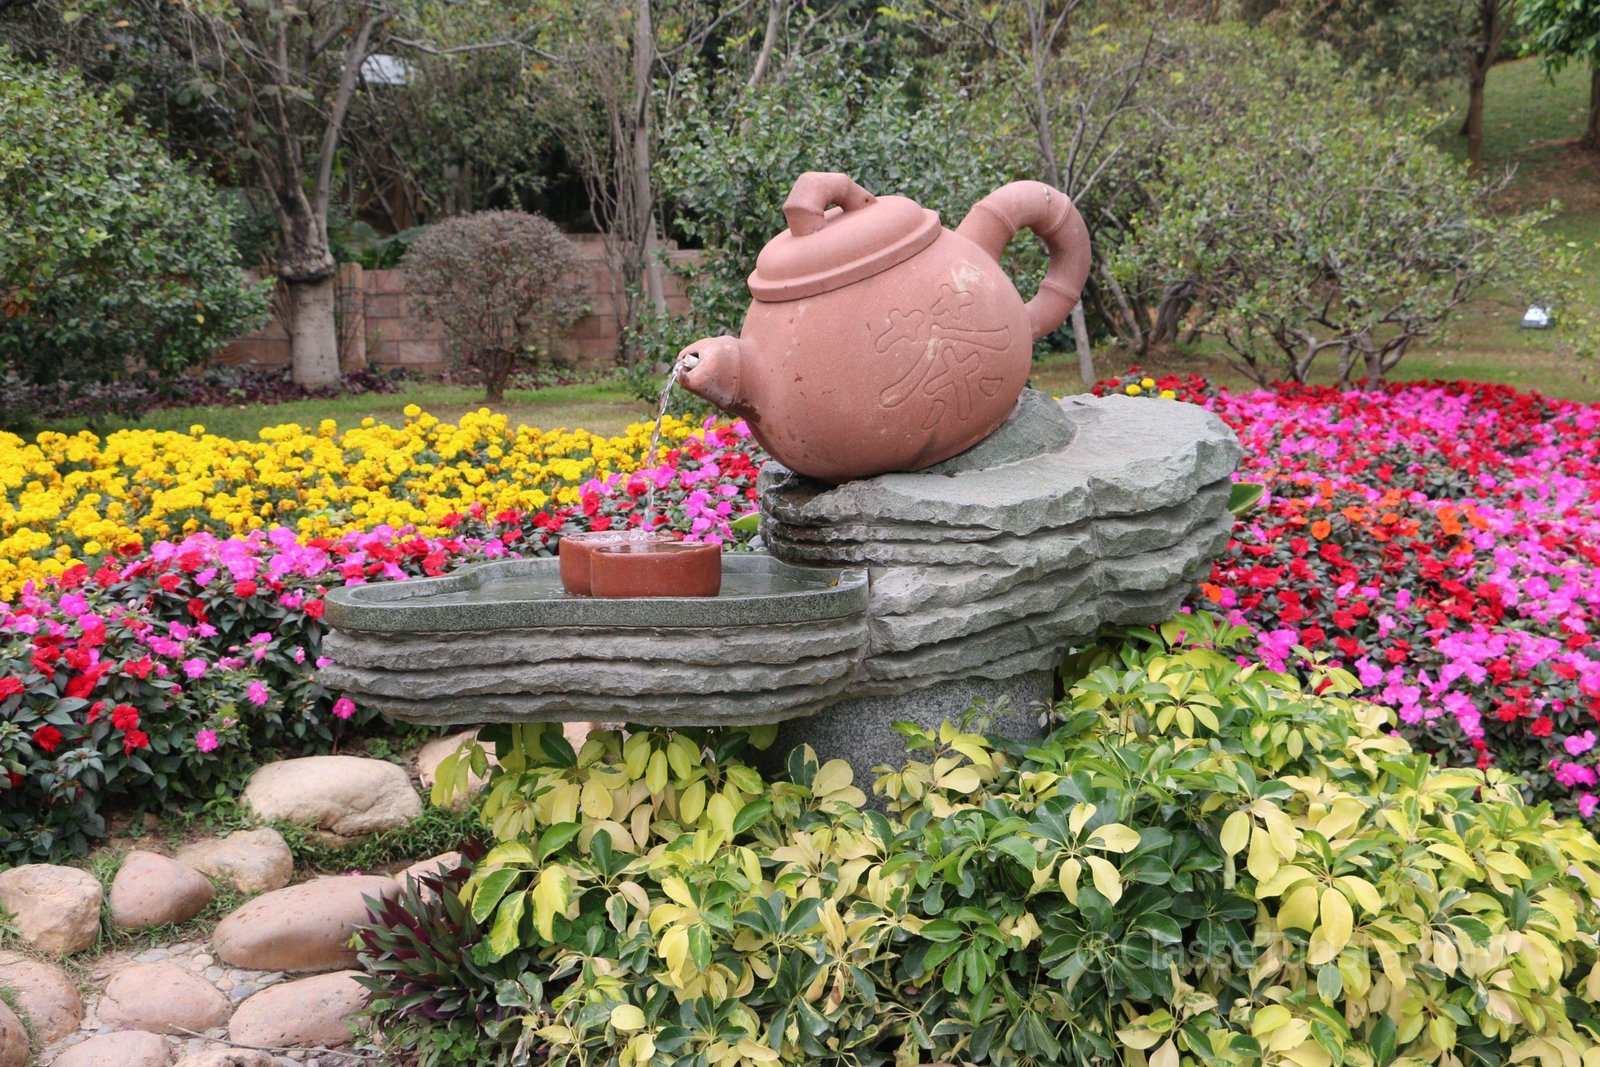 Things To Do In Guangzhou 7 Amazing, Large White Stones For Landscaping Boa Viagem Ceremony